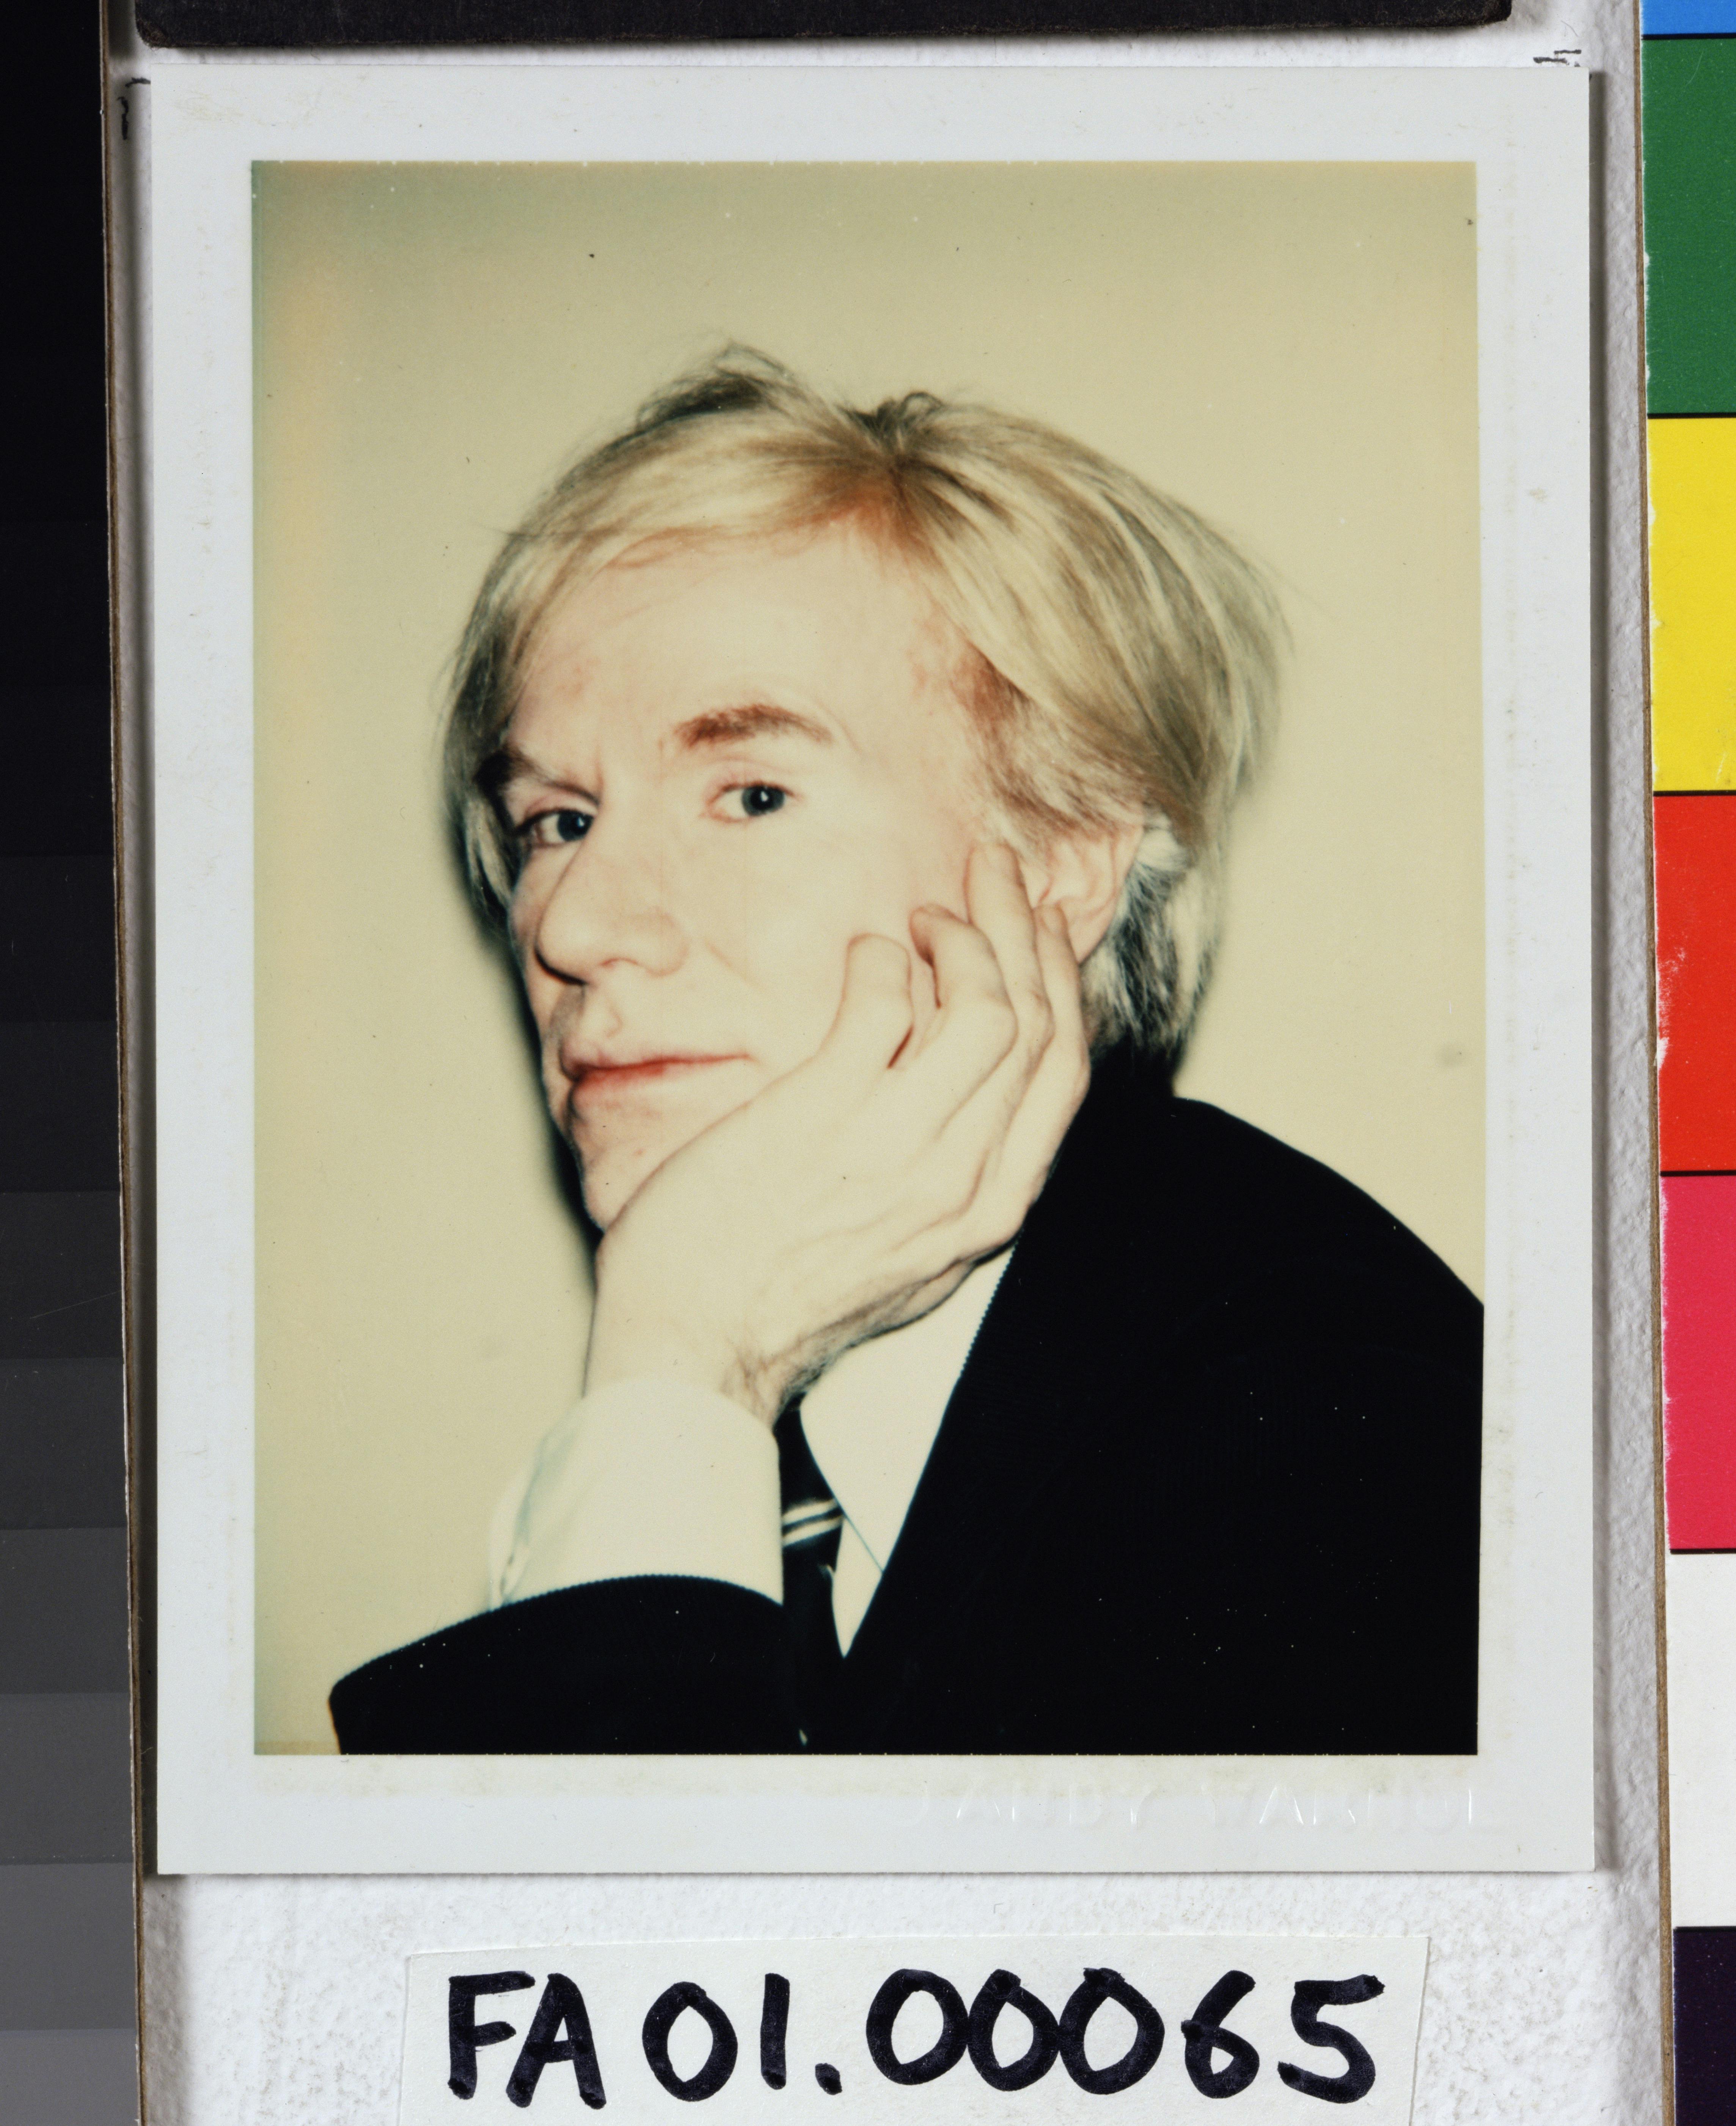 A polaroid of Andy Warhol in a black jacket and white shirt resting his chin on his palm. The bottom reads FA 0100065.